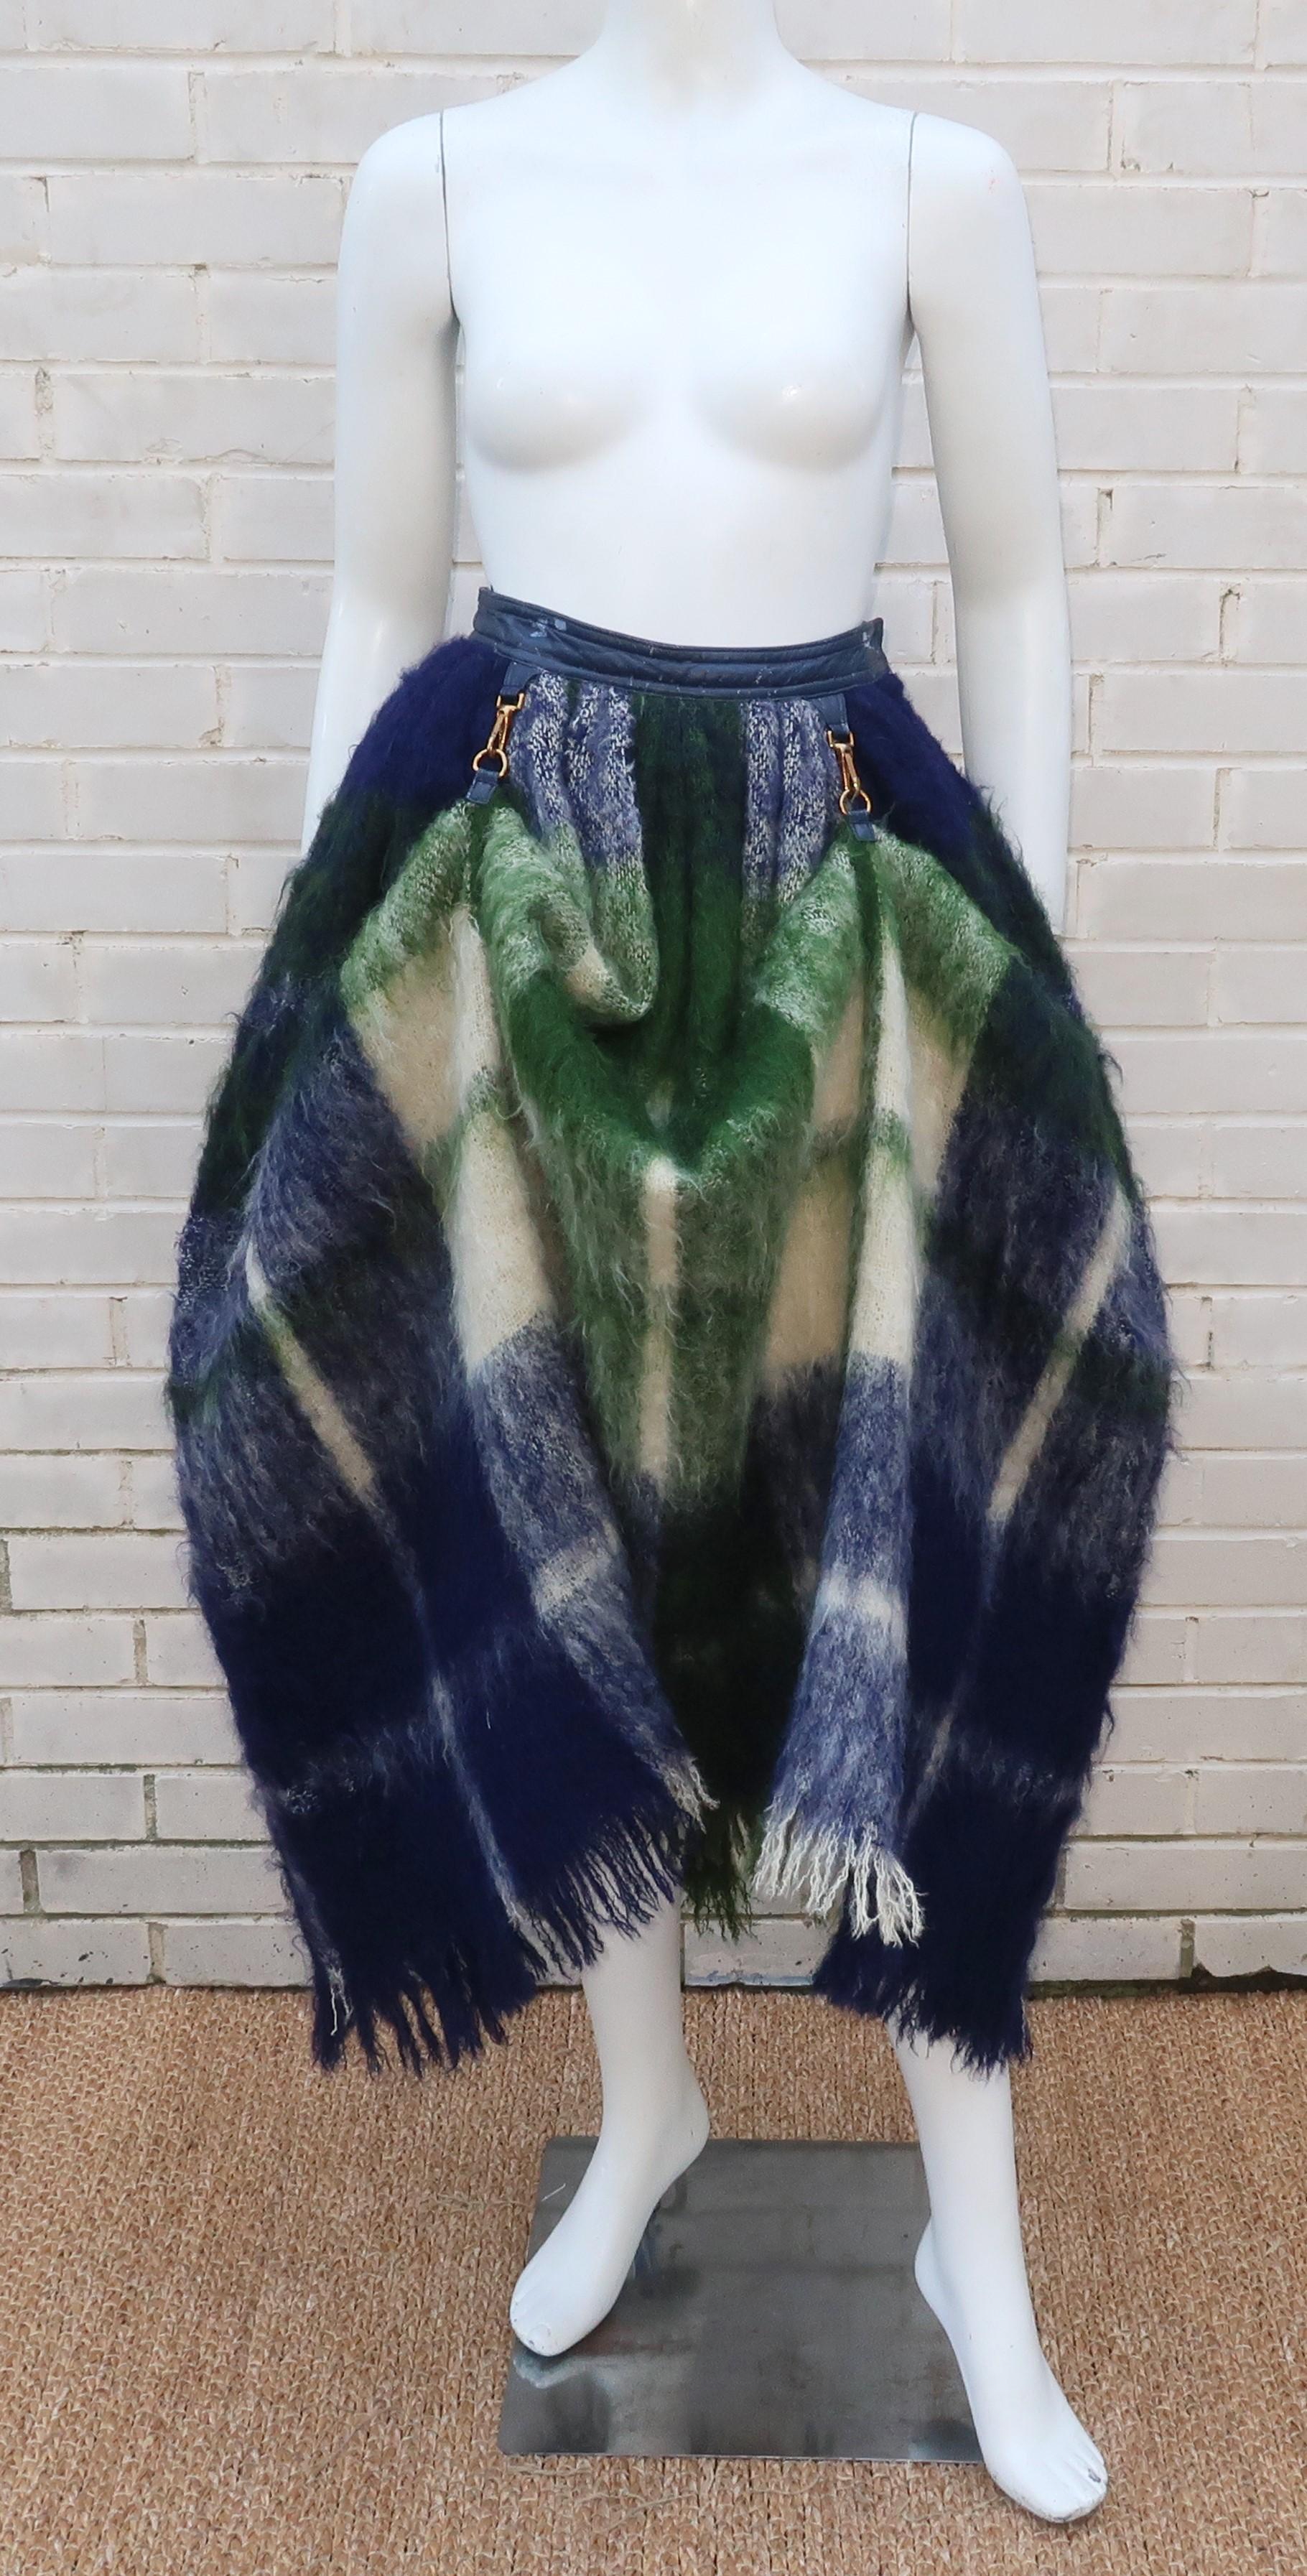 This is an early version of Bonnie Cashin's iconic dog leash skirt in a blue, green and ivory white plaid mohair with blue leather waistband.  Bonnie Cashin was one of the great innovators of modern fashion and helped create the American look and